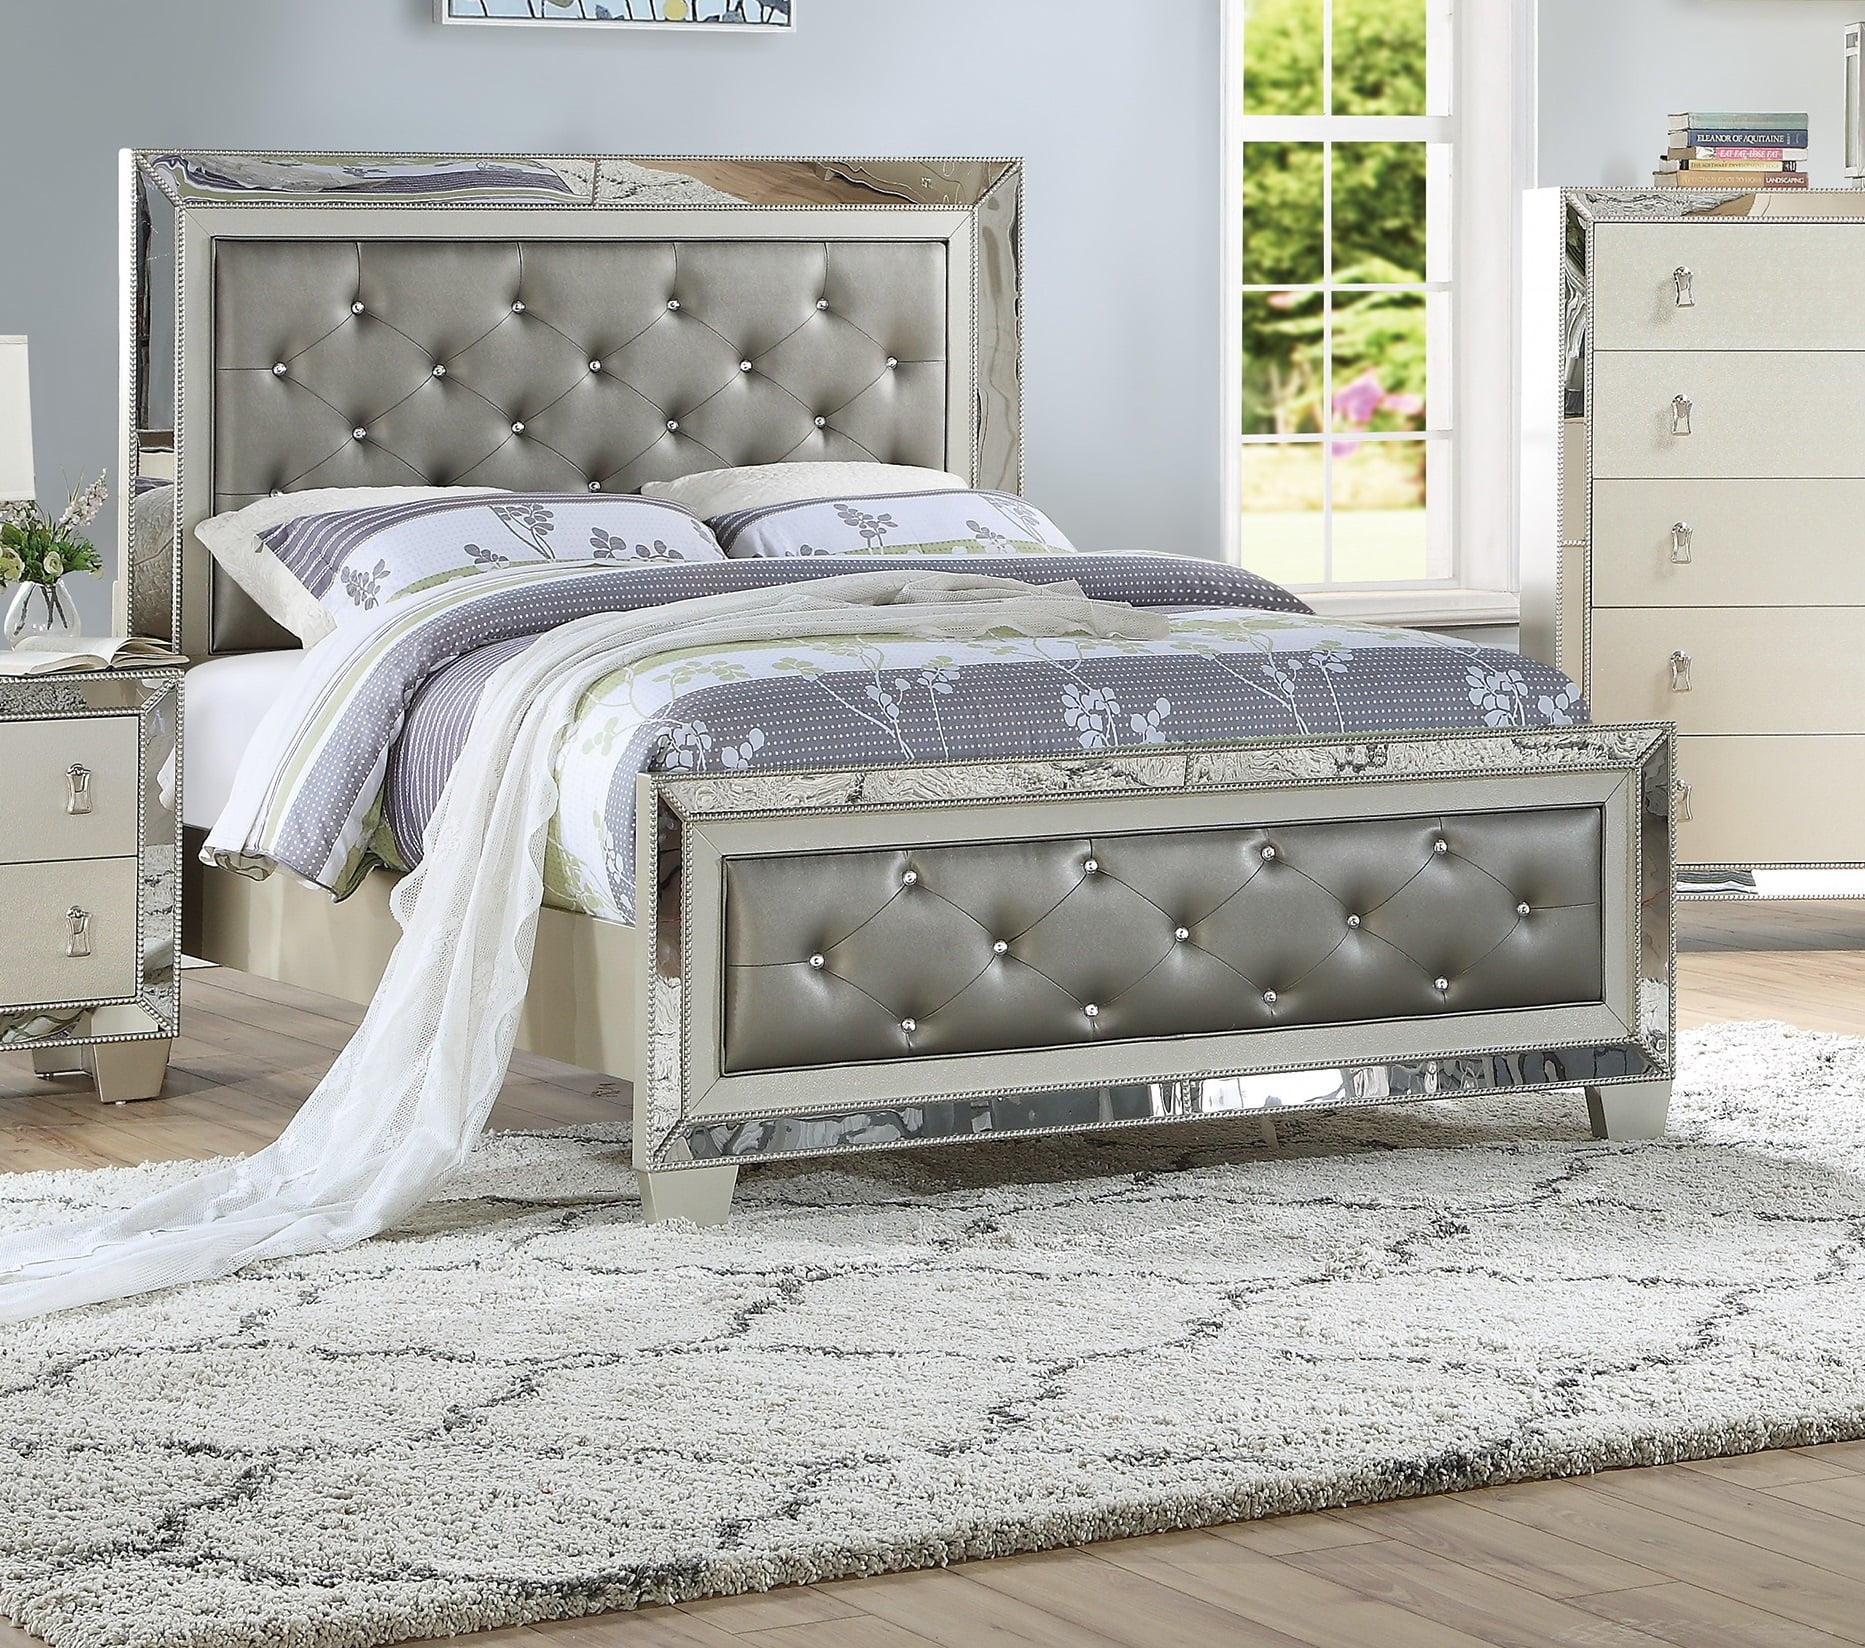 California King Size Bed Silver Top, King Size Bed Upholstered Headboard